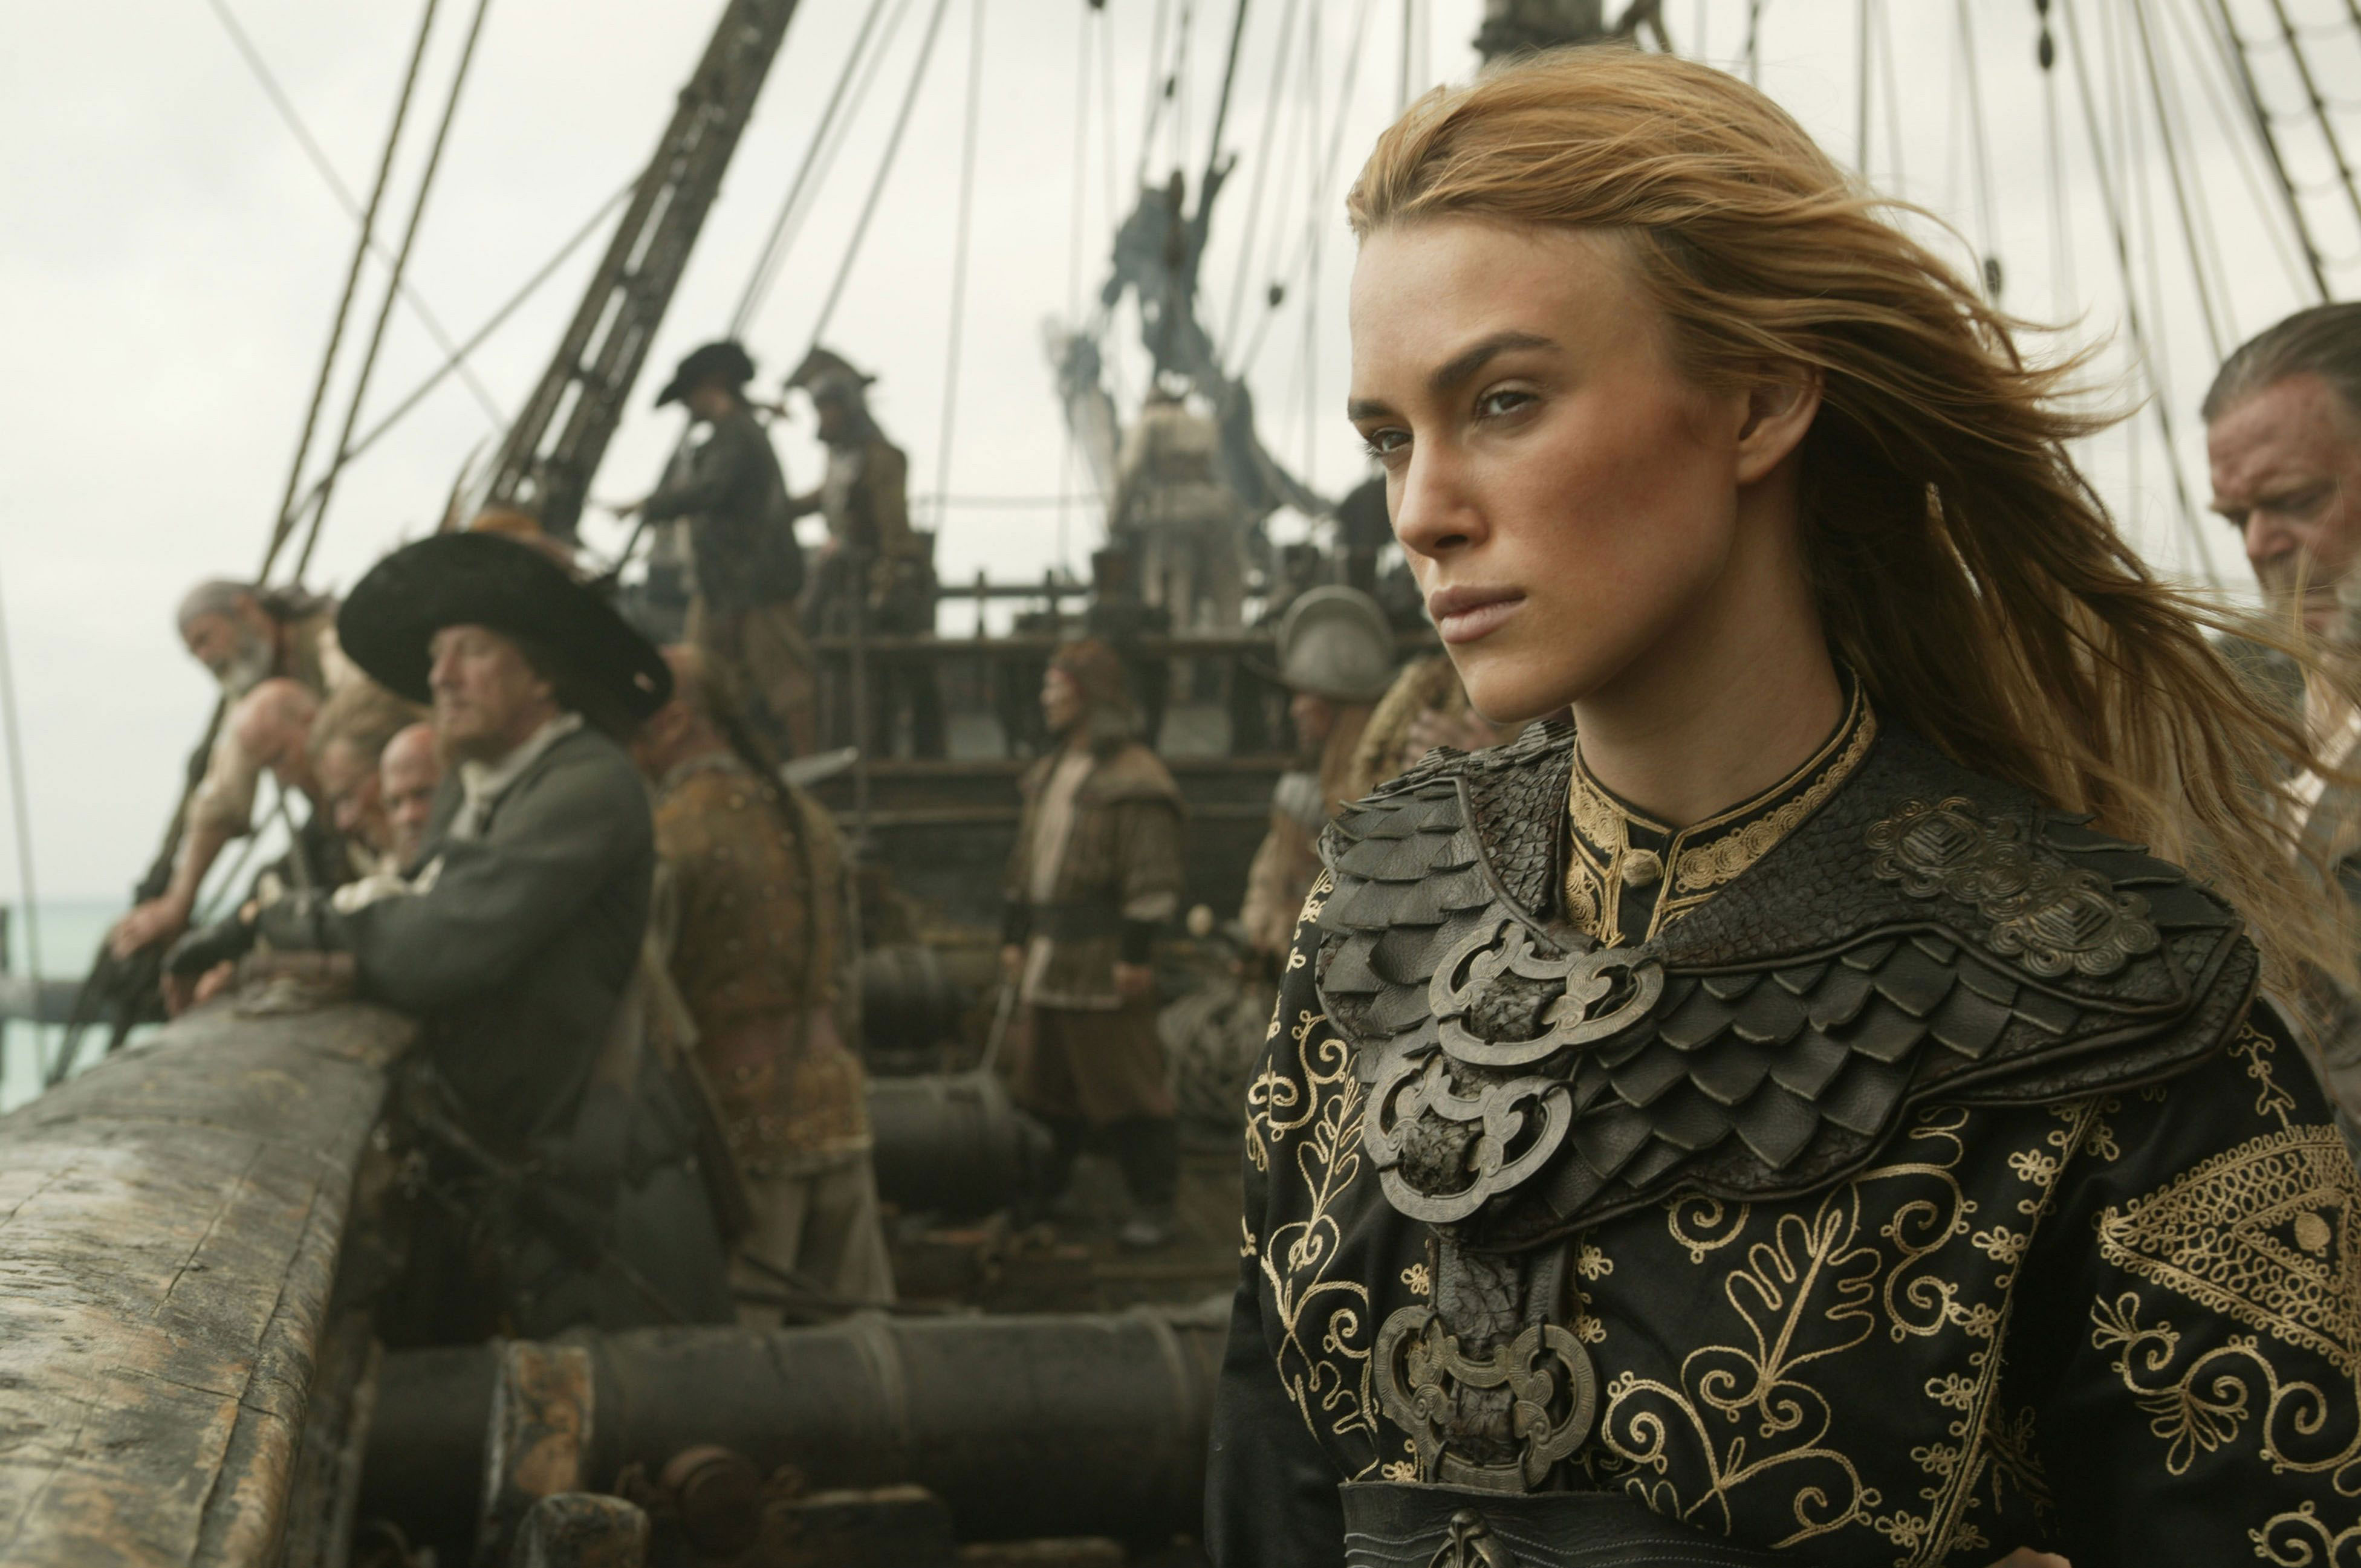 pirates of the caribbean, movie, pirates of the caribbean: at world's end, elizabeth swann, keira knightley